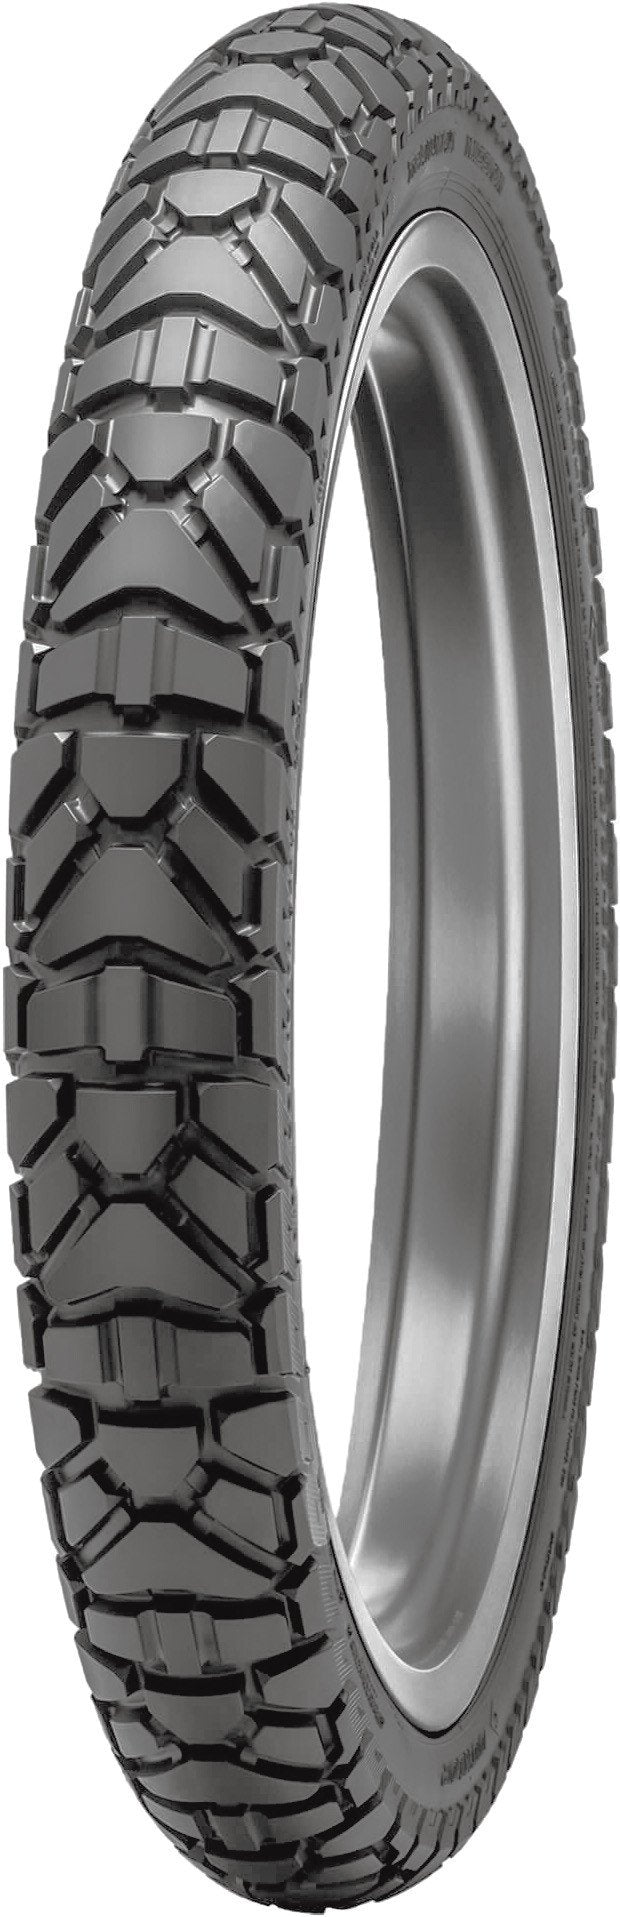 Dunlop Trailmax Mission Tire - Hardcore Cycles Inc